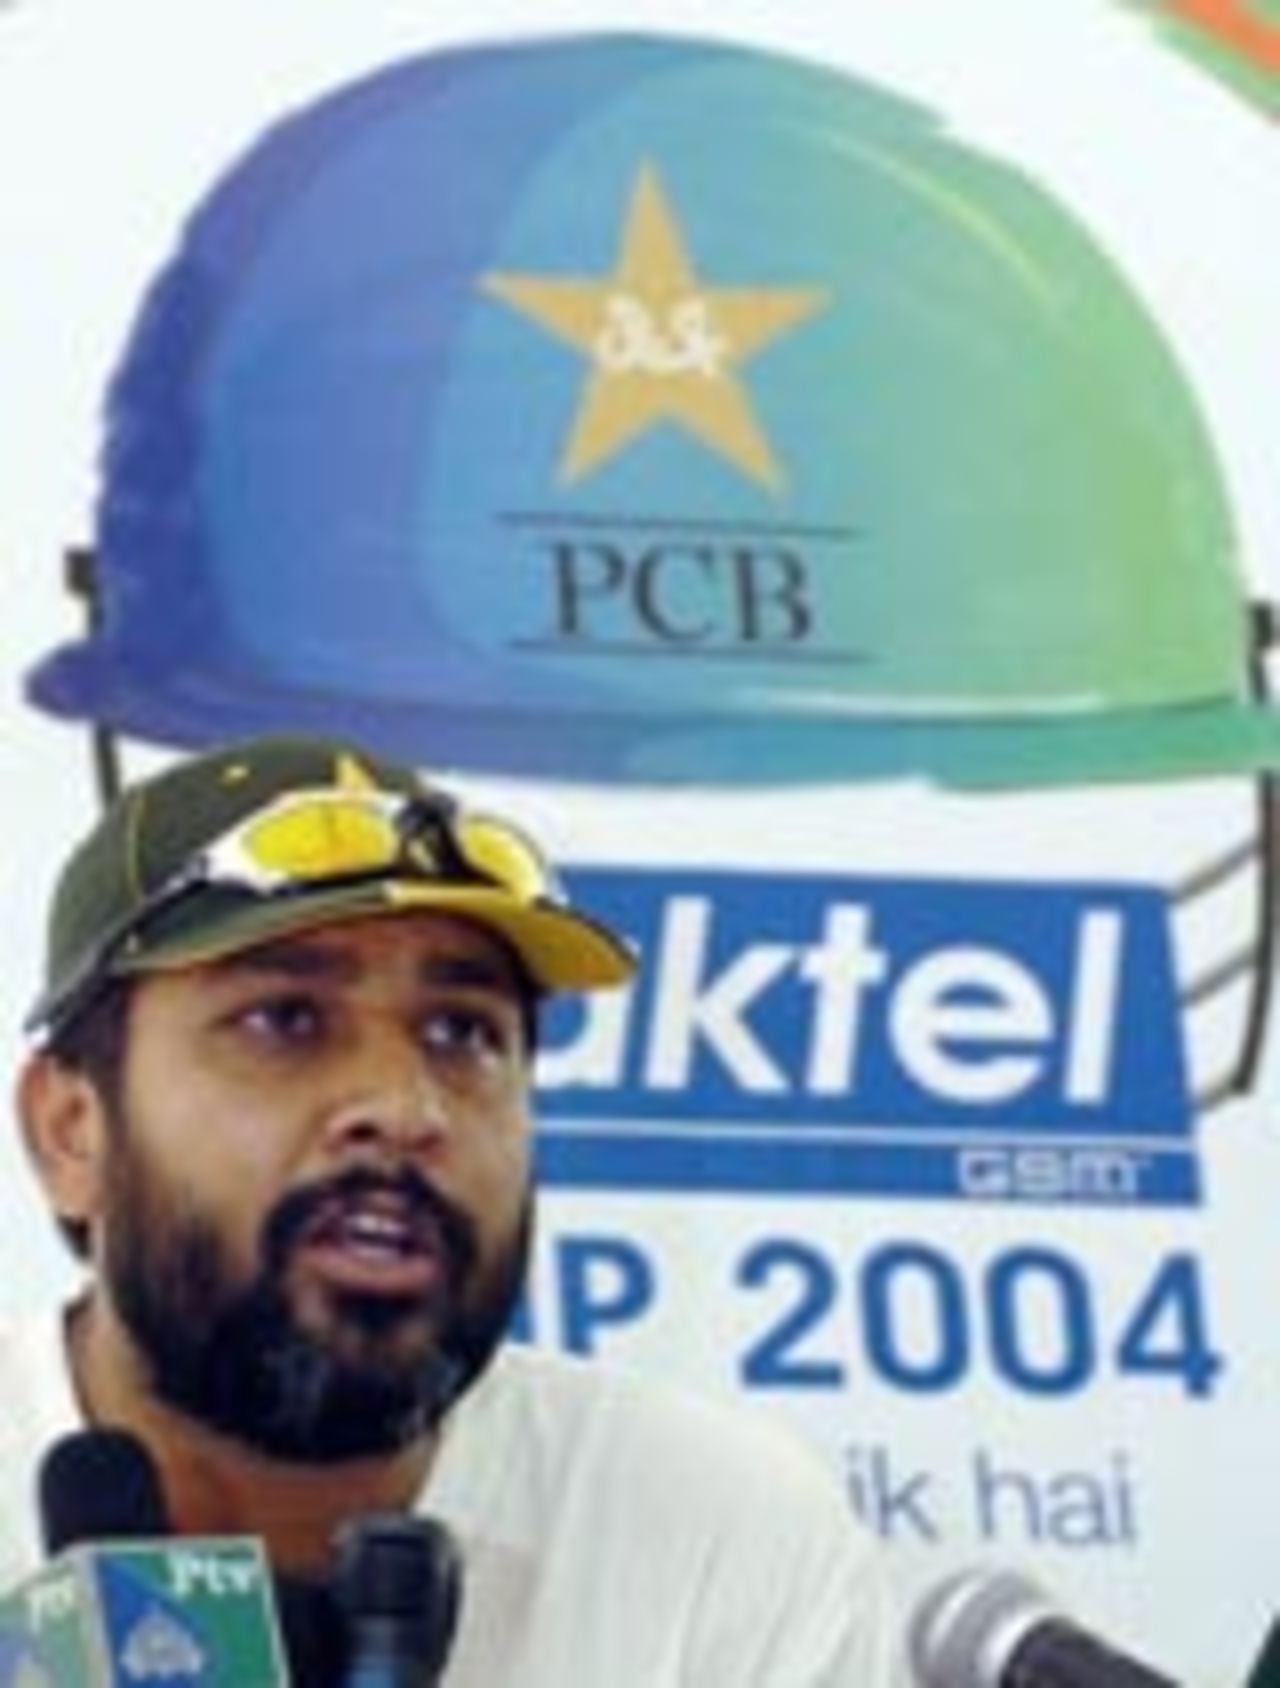 Inzamam-ul-Haq talking to the media against the backdrop of the Paktel Cup, September 29, 2004